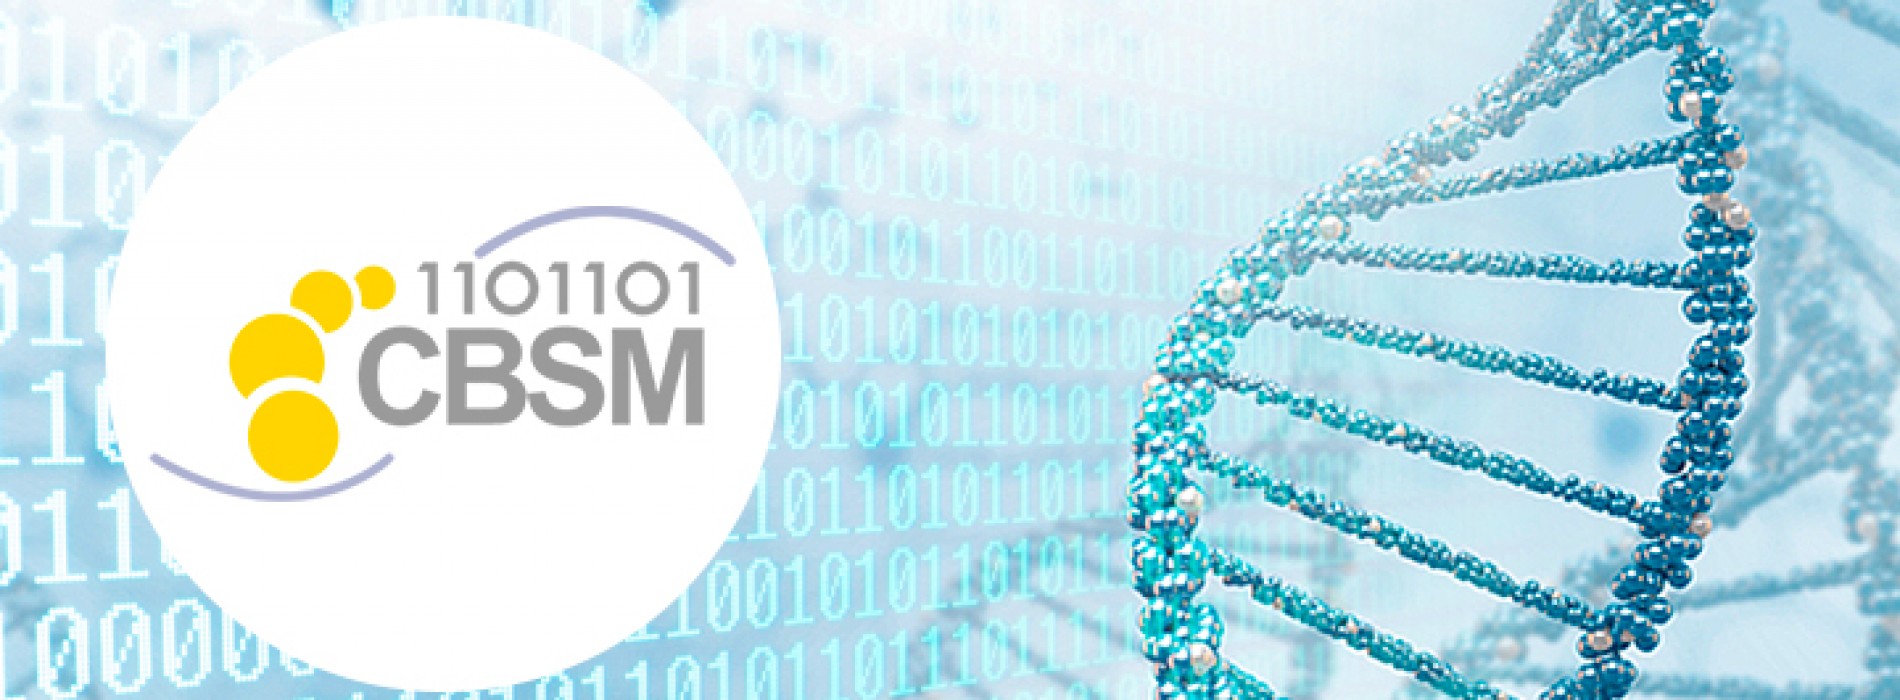 ICBSM (FIRST INTERNATIONAL CONFERENCE IN BIOINFORMATICS, SIMULATIONS AND MODELING)